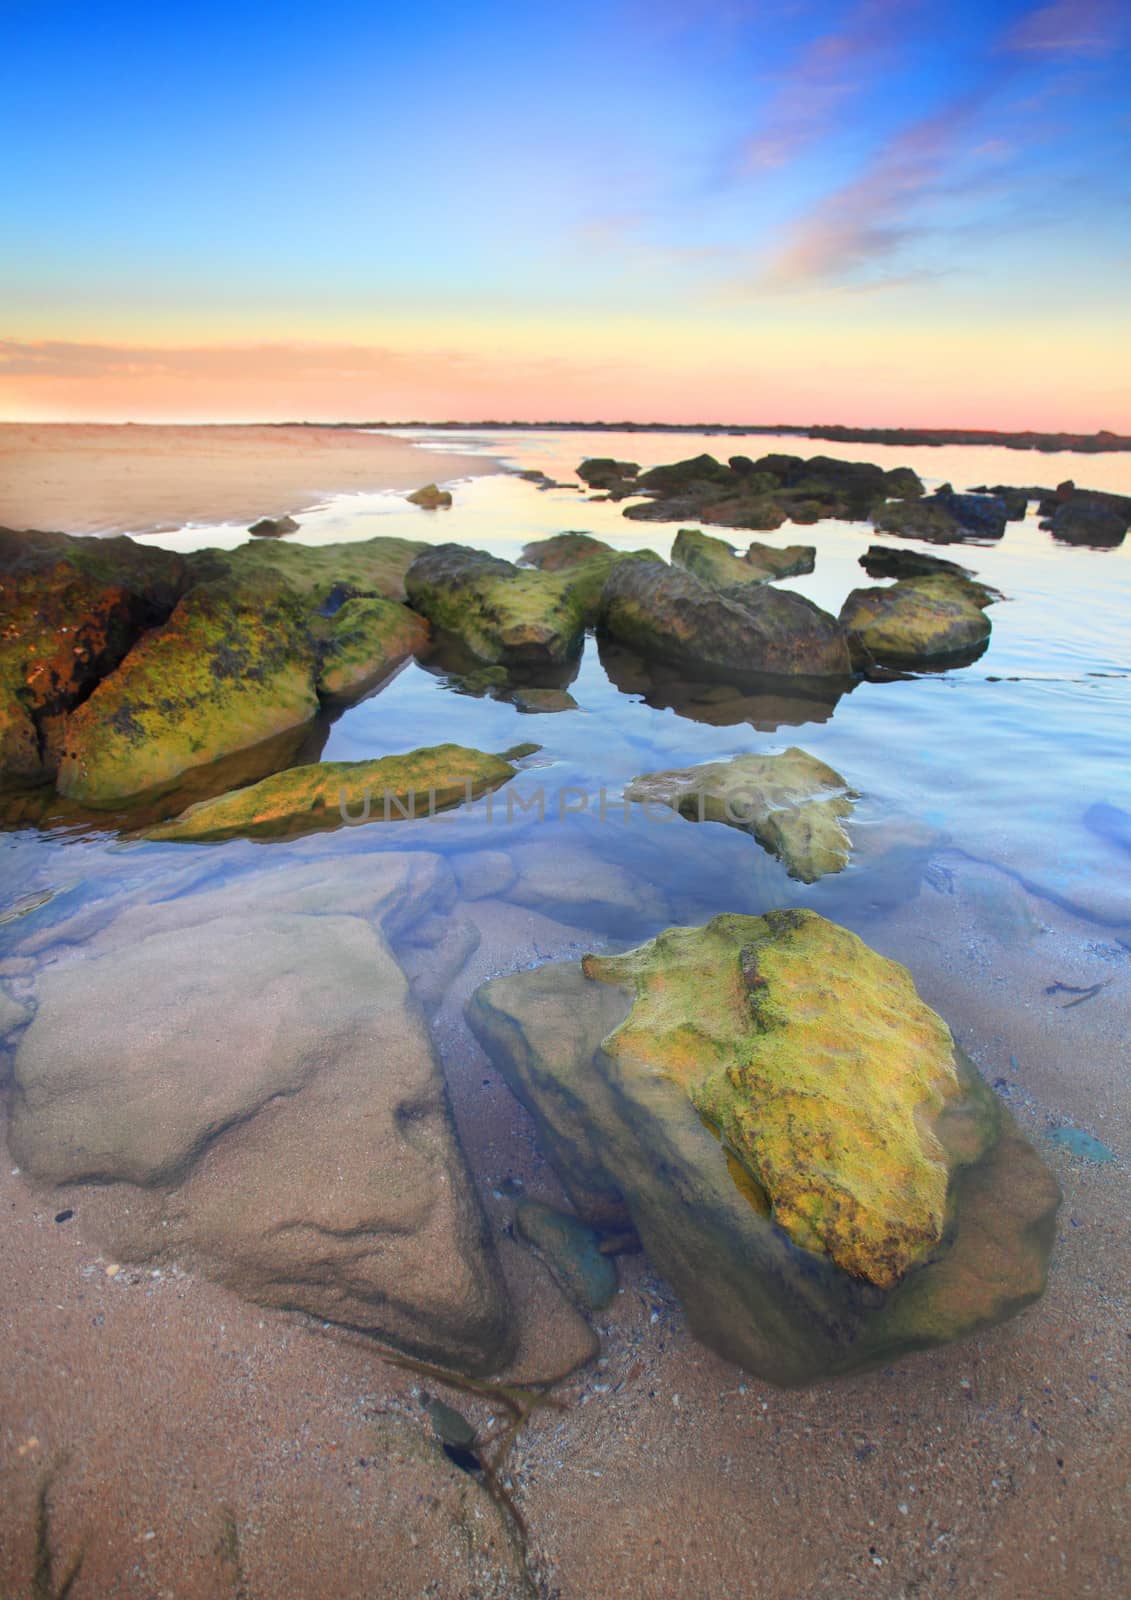 Beautiful sunset at unspoilt Toowoon Bay beach at low tide exposing the mossy green rocks on the reef shelf.  Australia.  Focus to foreground only